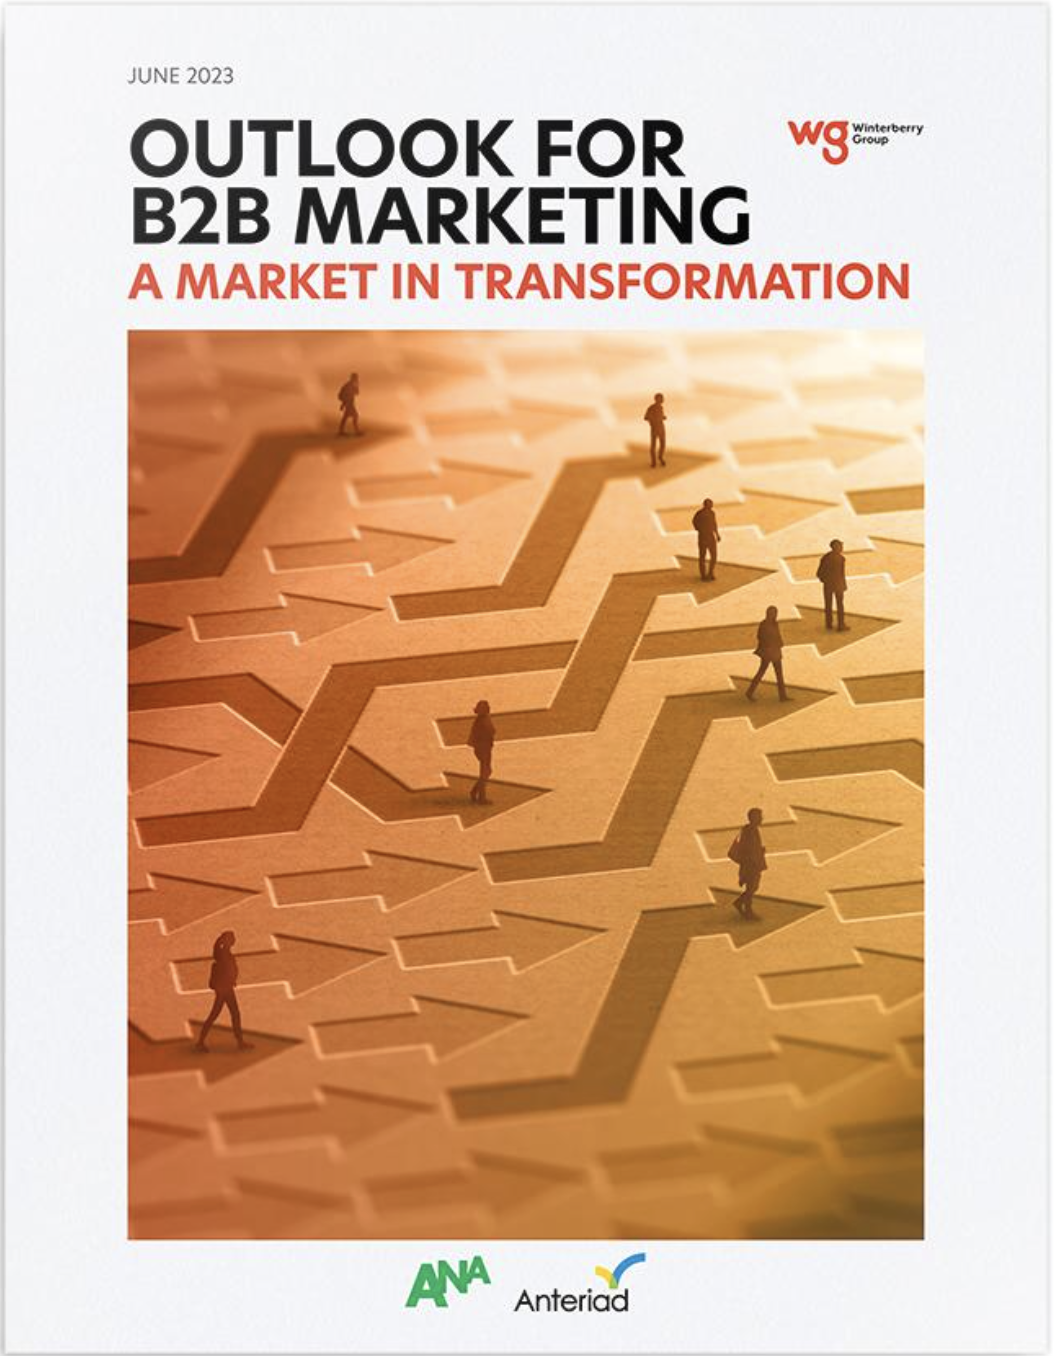 NEW RESEARCH HIGHLIGHTS ‘TRANSFORMATION’ OF B2B MARKETING IN U.S. AND EUROPE